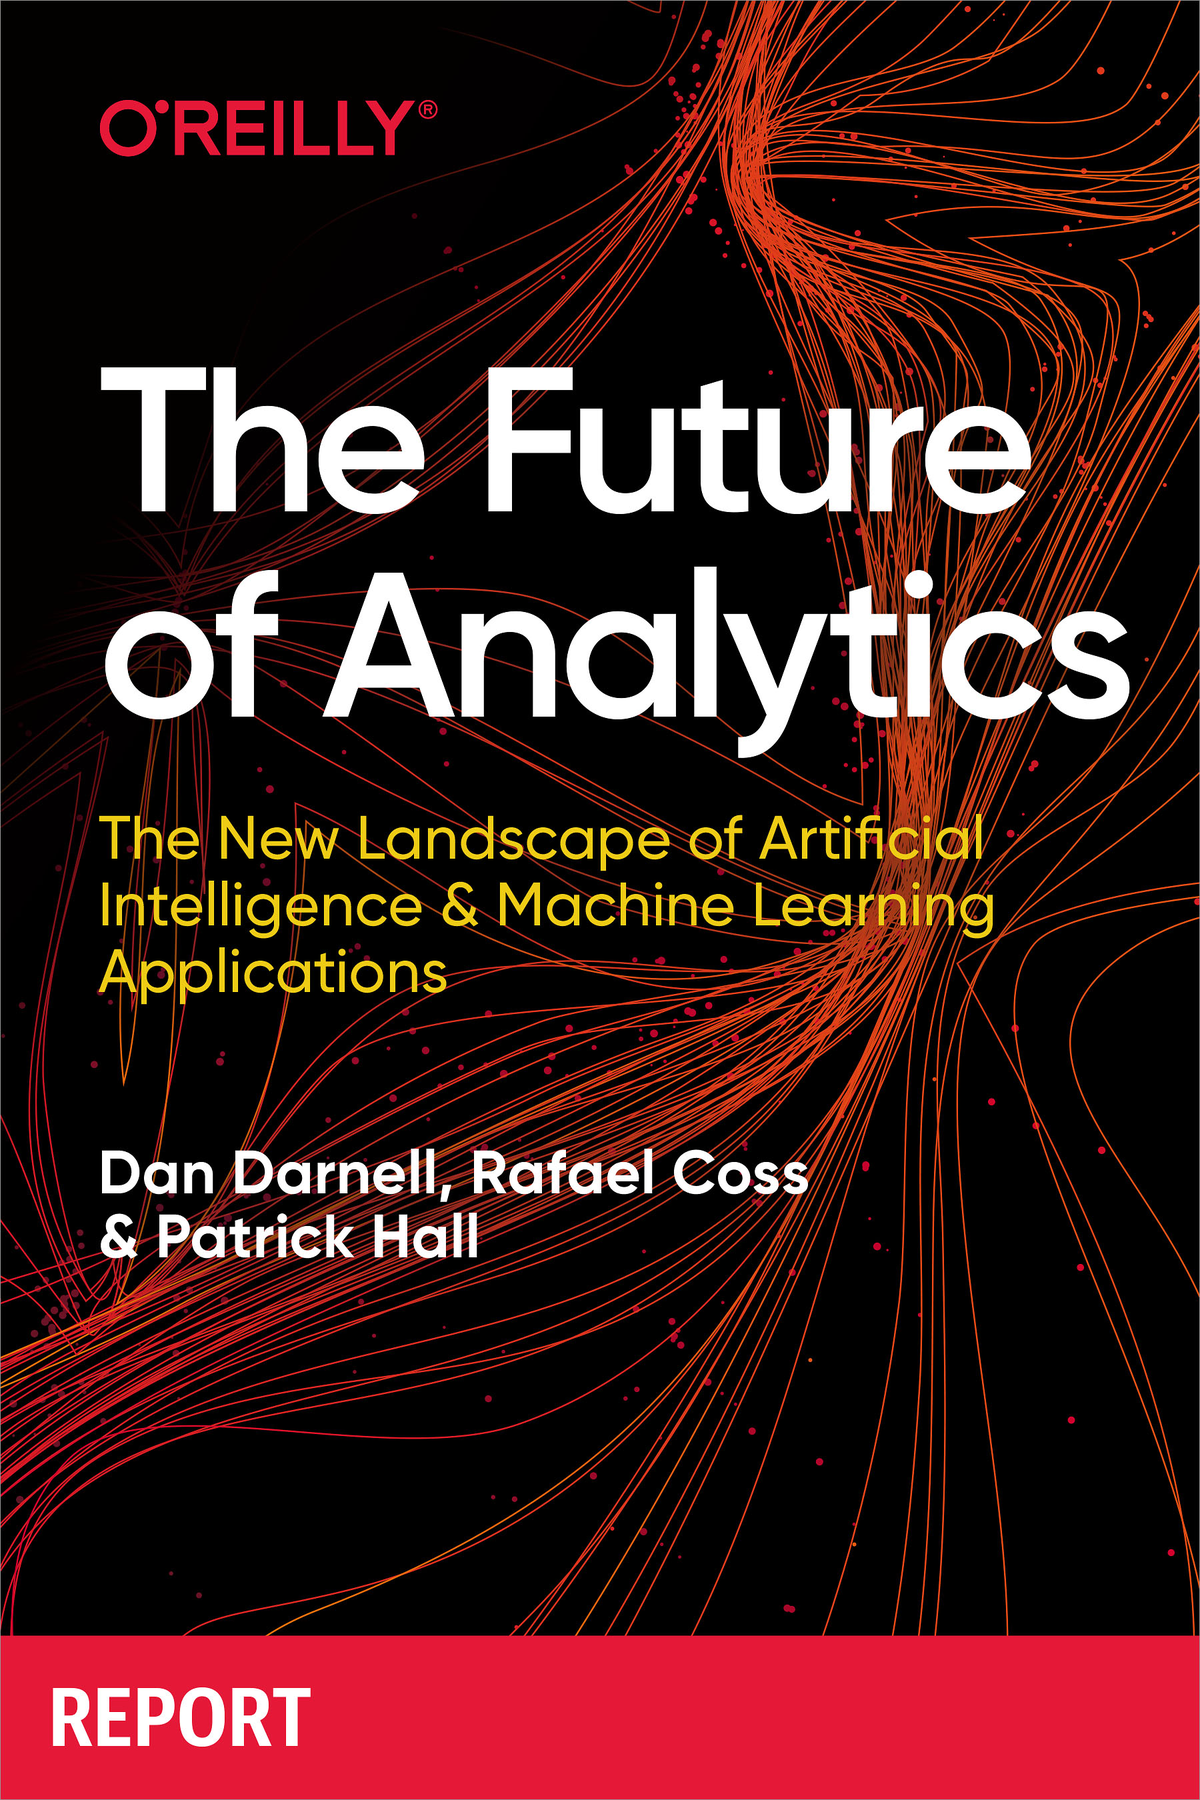 The Future of Analytics by Dan Darnell Rafael Coss and Patrick Hall - photo 1